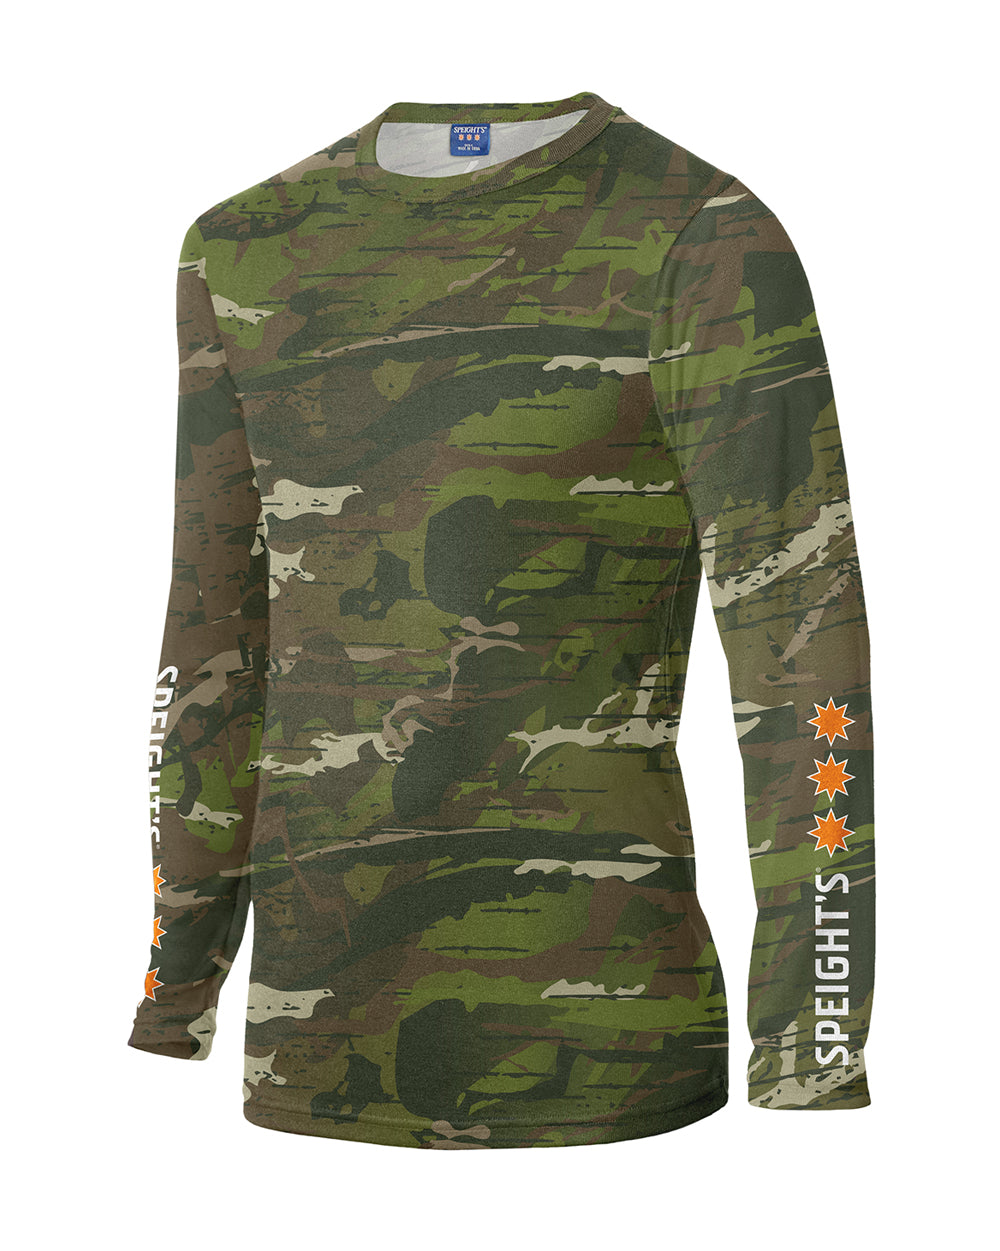 Speight's Camo Polyprop -  Beer Gear Apparel & Merchandise - Speights - Lion Red - VB - Tokyo Dy merch